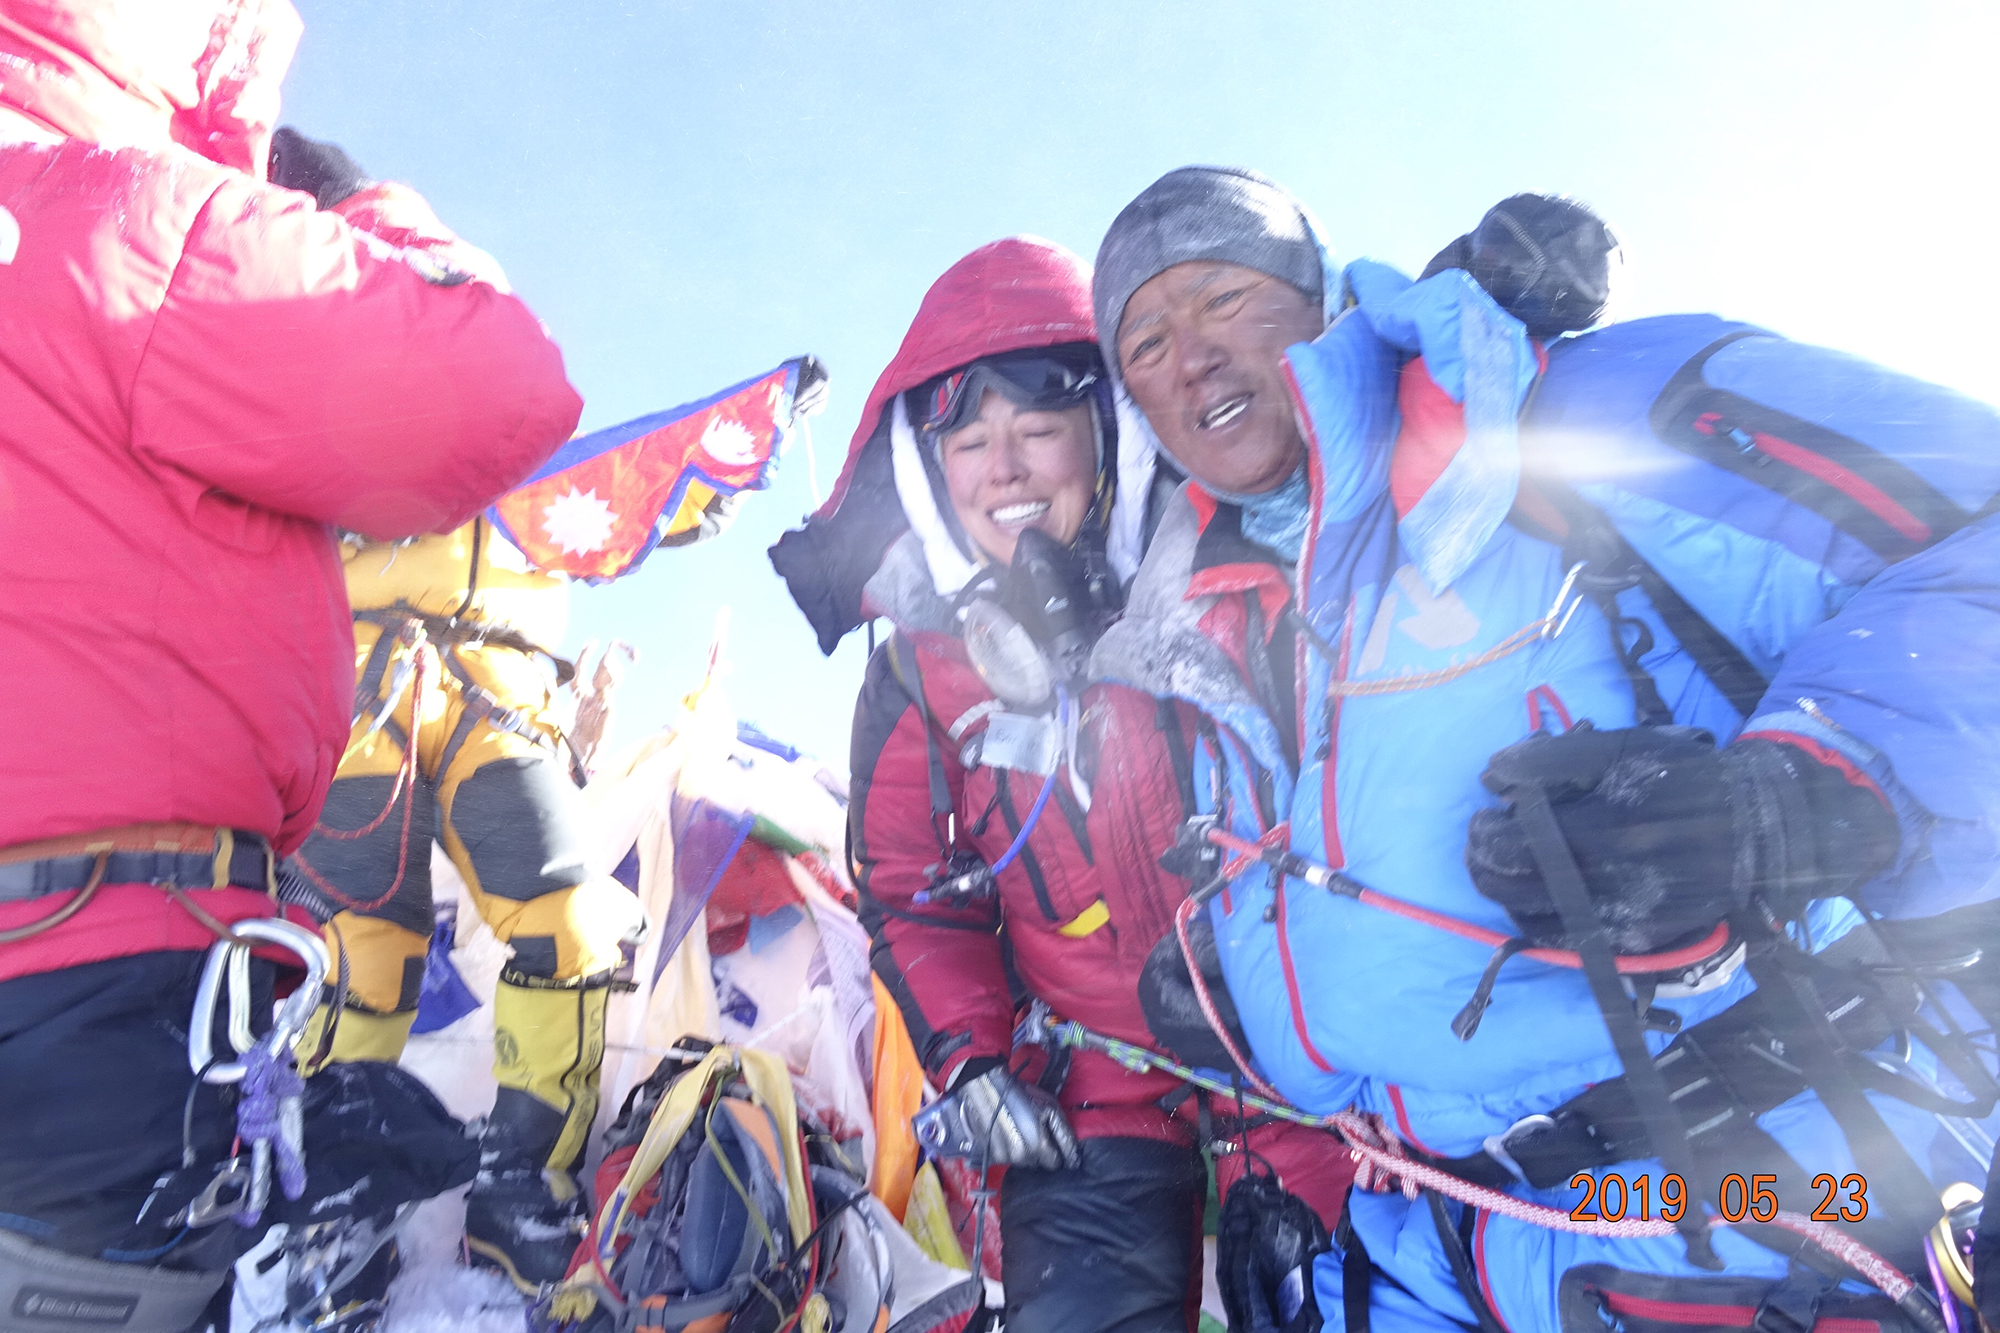 Sophie Hilaire at the top of Mount Everest with her guide, Ang Dorjee. (Photo: Rinji Sherpa)